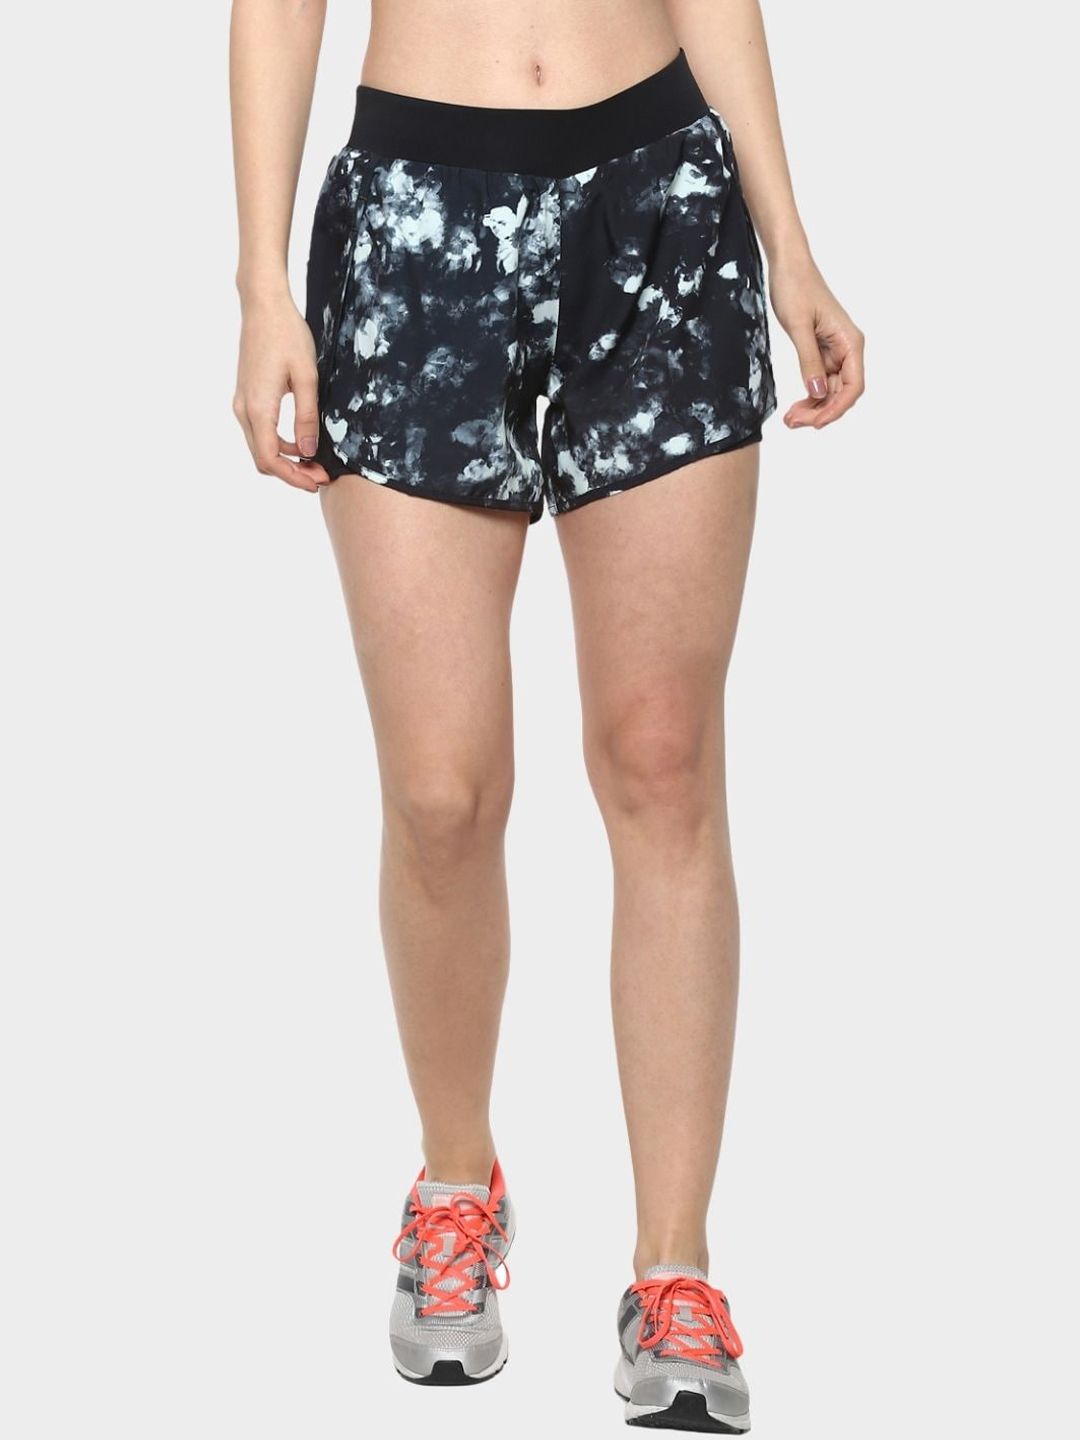 Silvertraq Women Black Printed Slim Fit High-Rise Training or Gym Sports Shorts Price in India